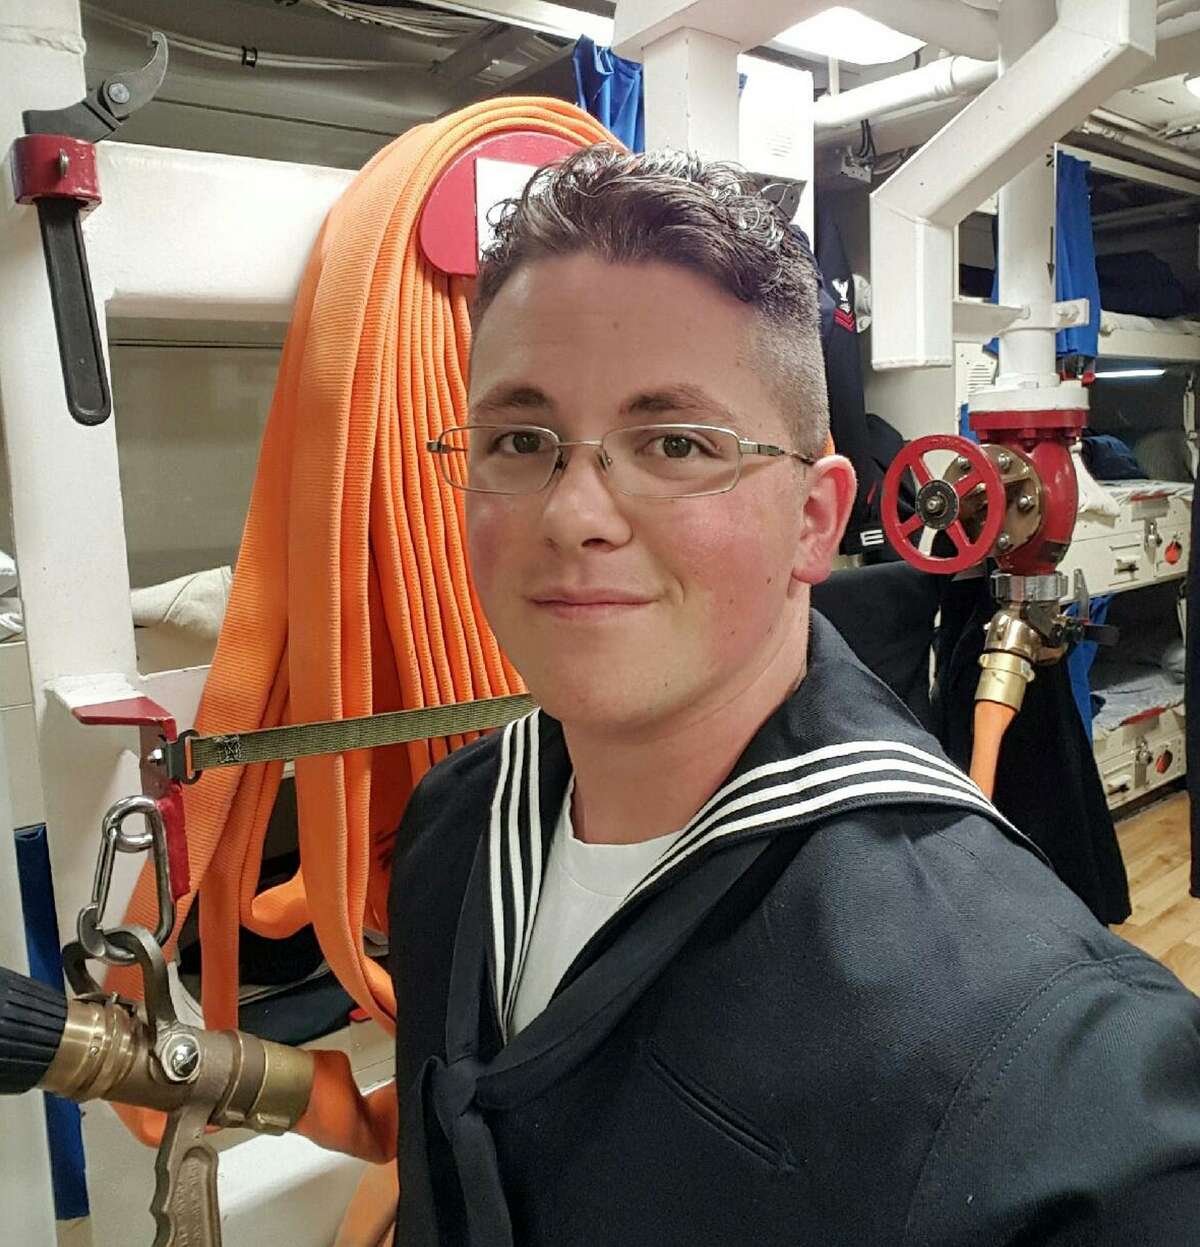 This undated photo provided by Cynthia Kimball shows her son John Hoagland aboard the USS John McCain. Kimball said Wednesday, Aug. 23, 2017, the Navy told her that her son is among the missing seamen who were aboard the USS John McCain when it collided with an oil tanker near Singapore Monday, Aug. 21. (Cynthia Kimball via AP)